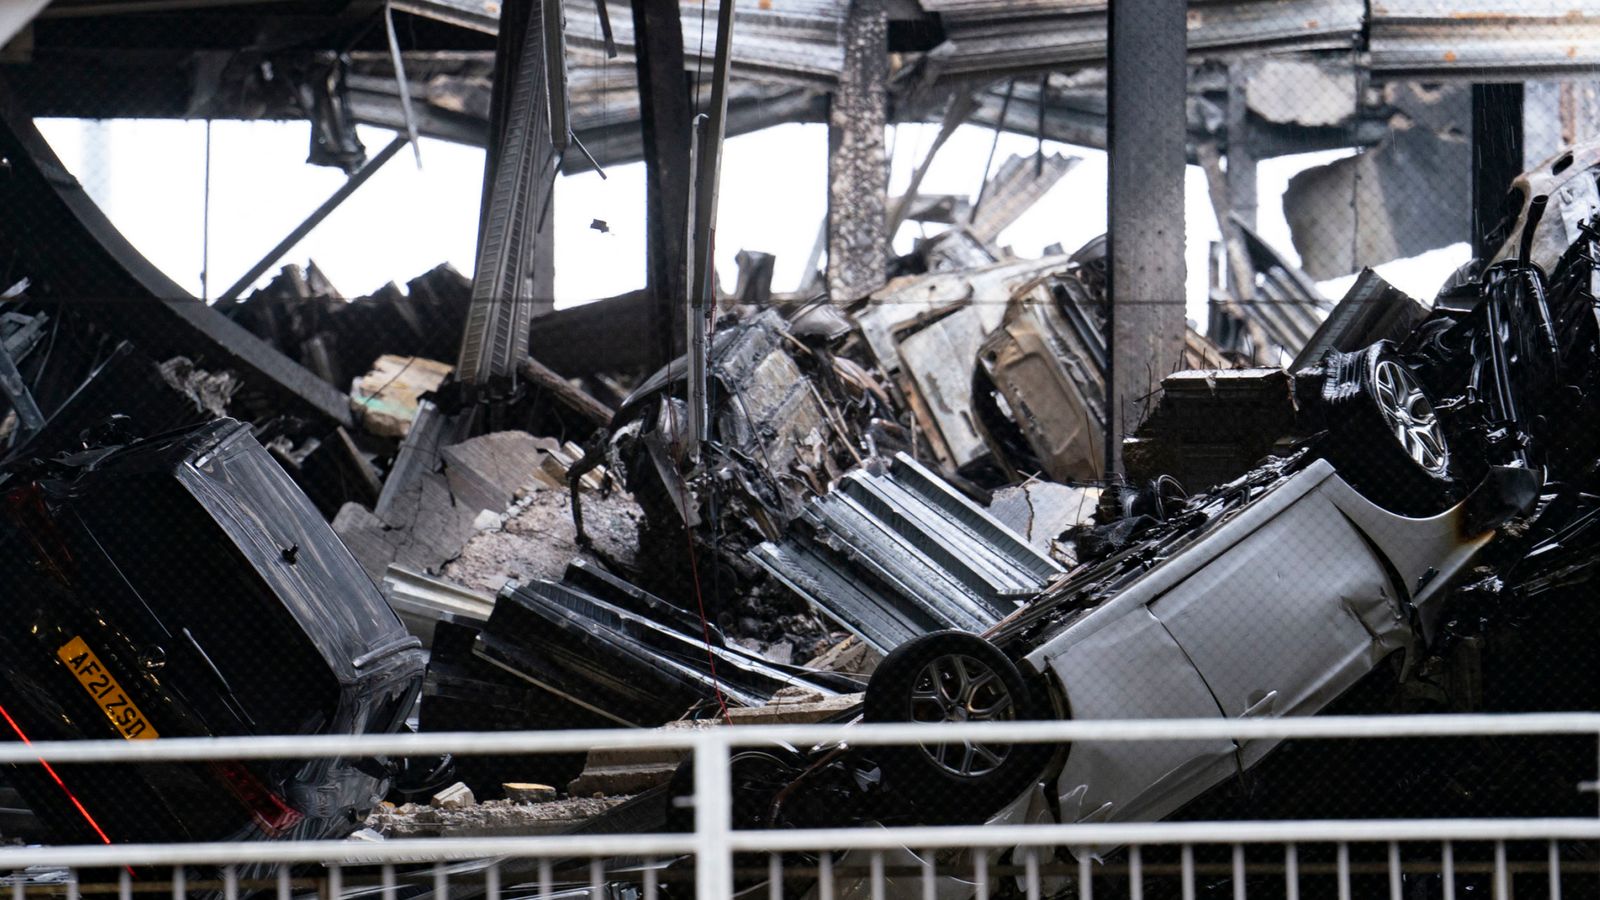 Luton Airport fire: Holidaymakers 'left in limbo' after car park blaze